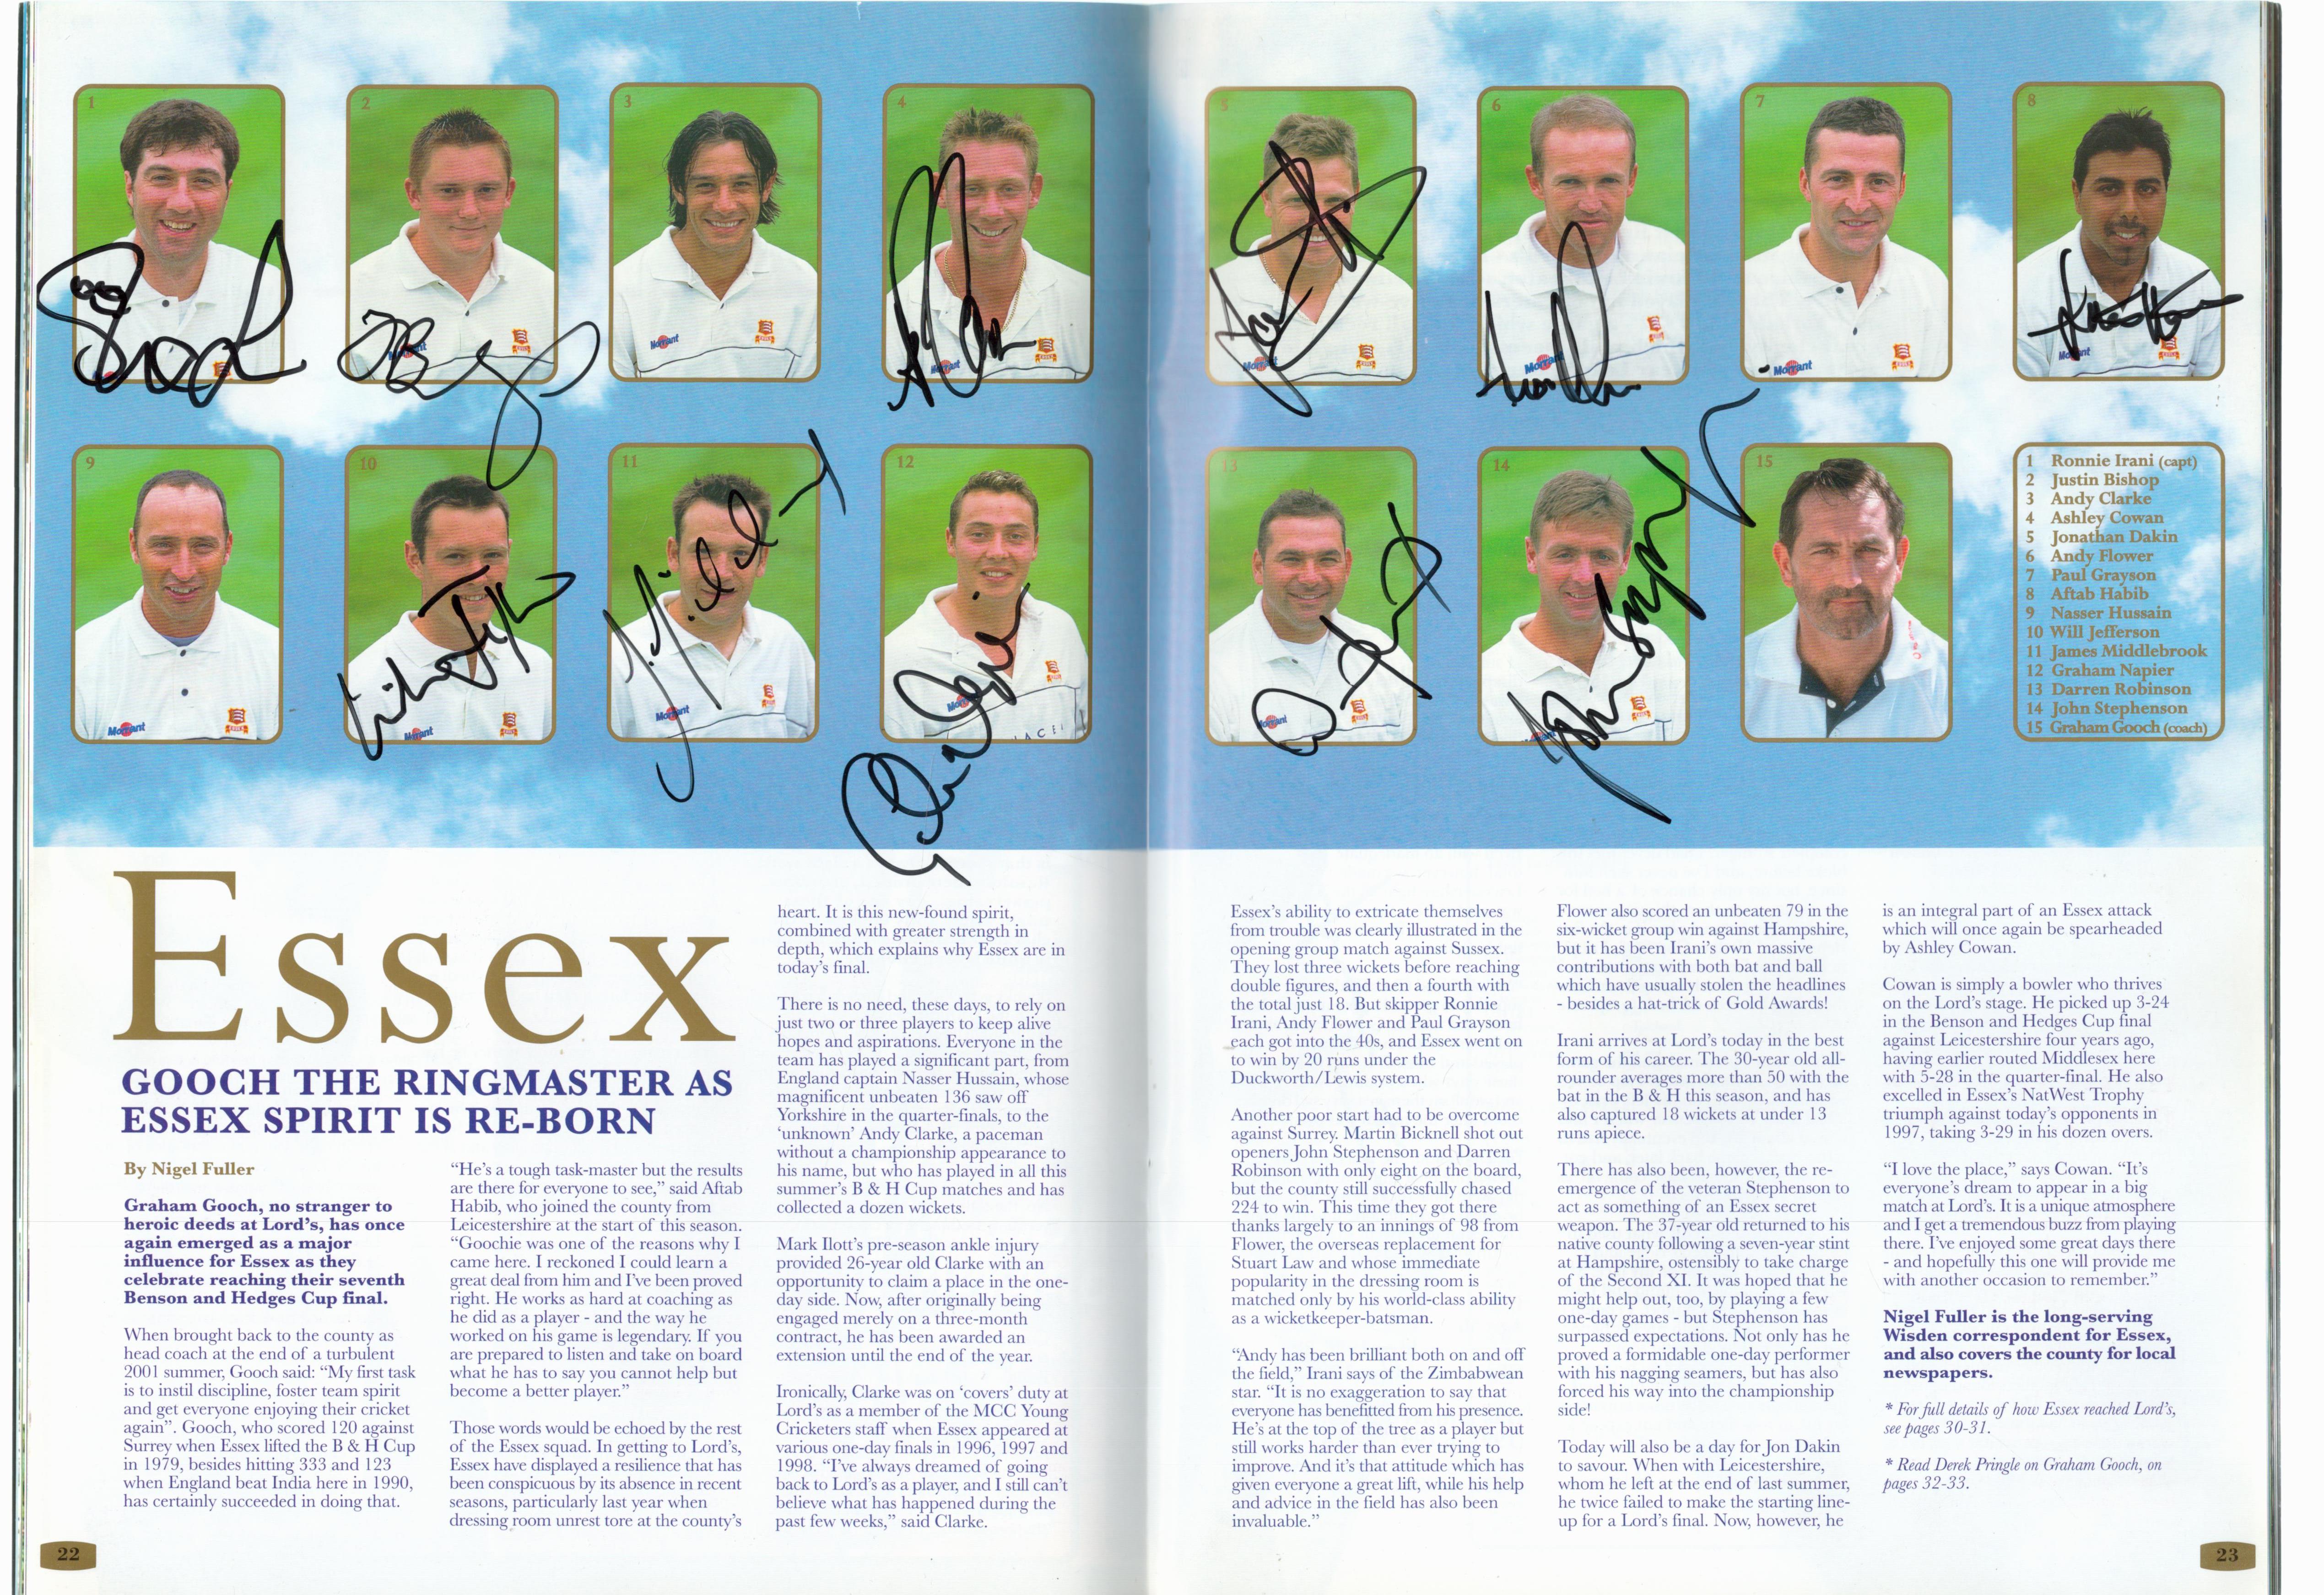 Official match programme signed for the 2002 Benson and Hedges Cup Final played between Essex and